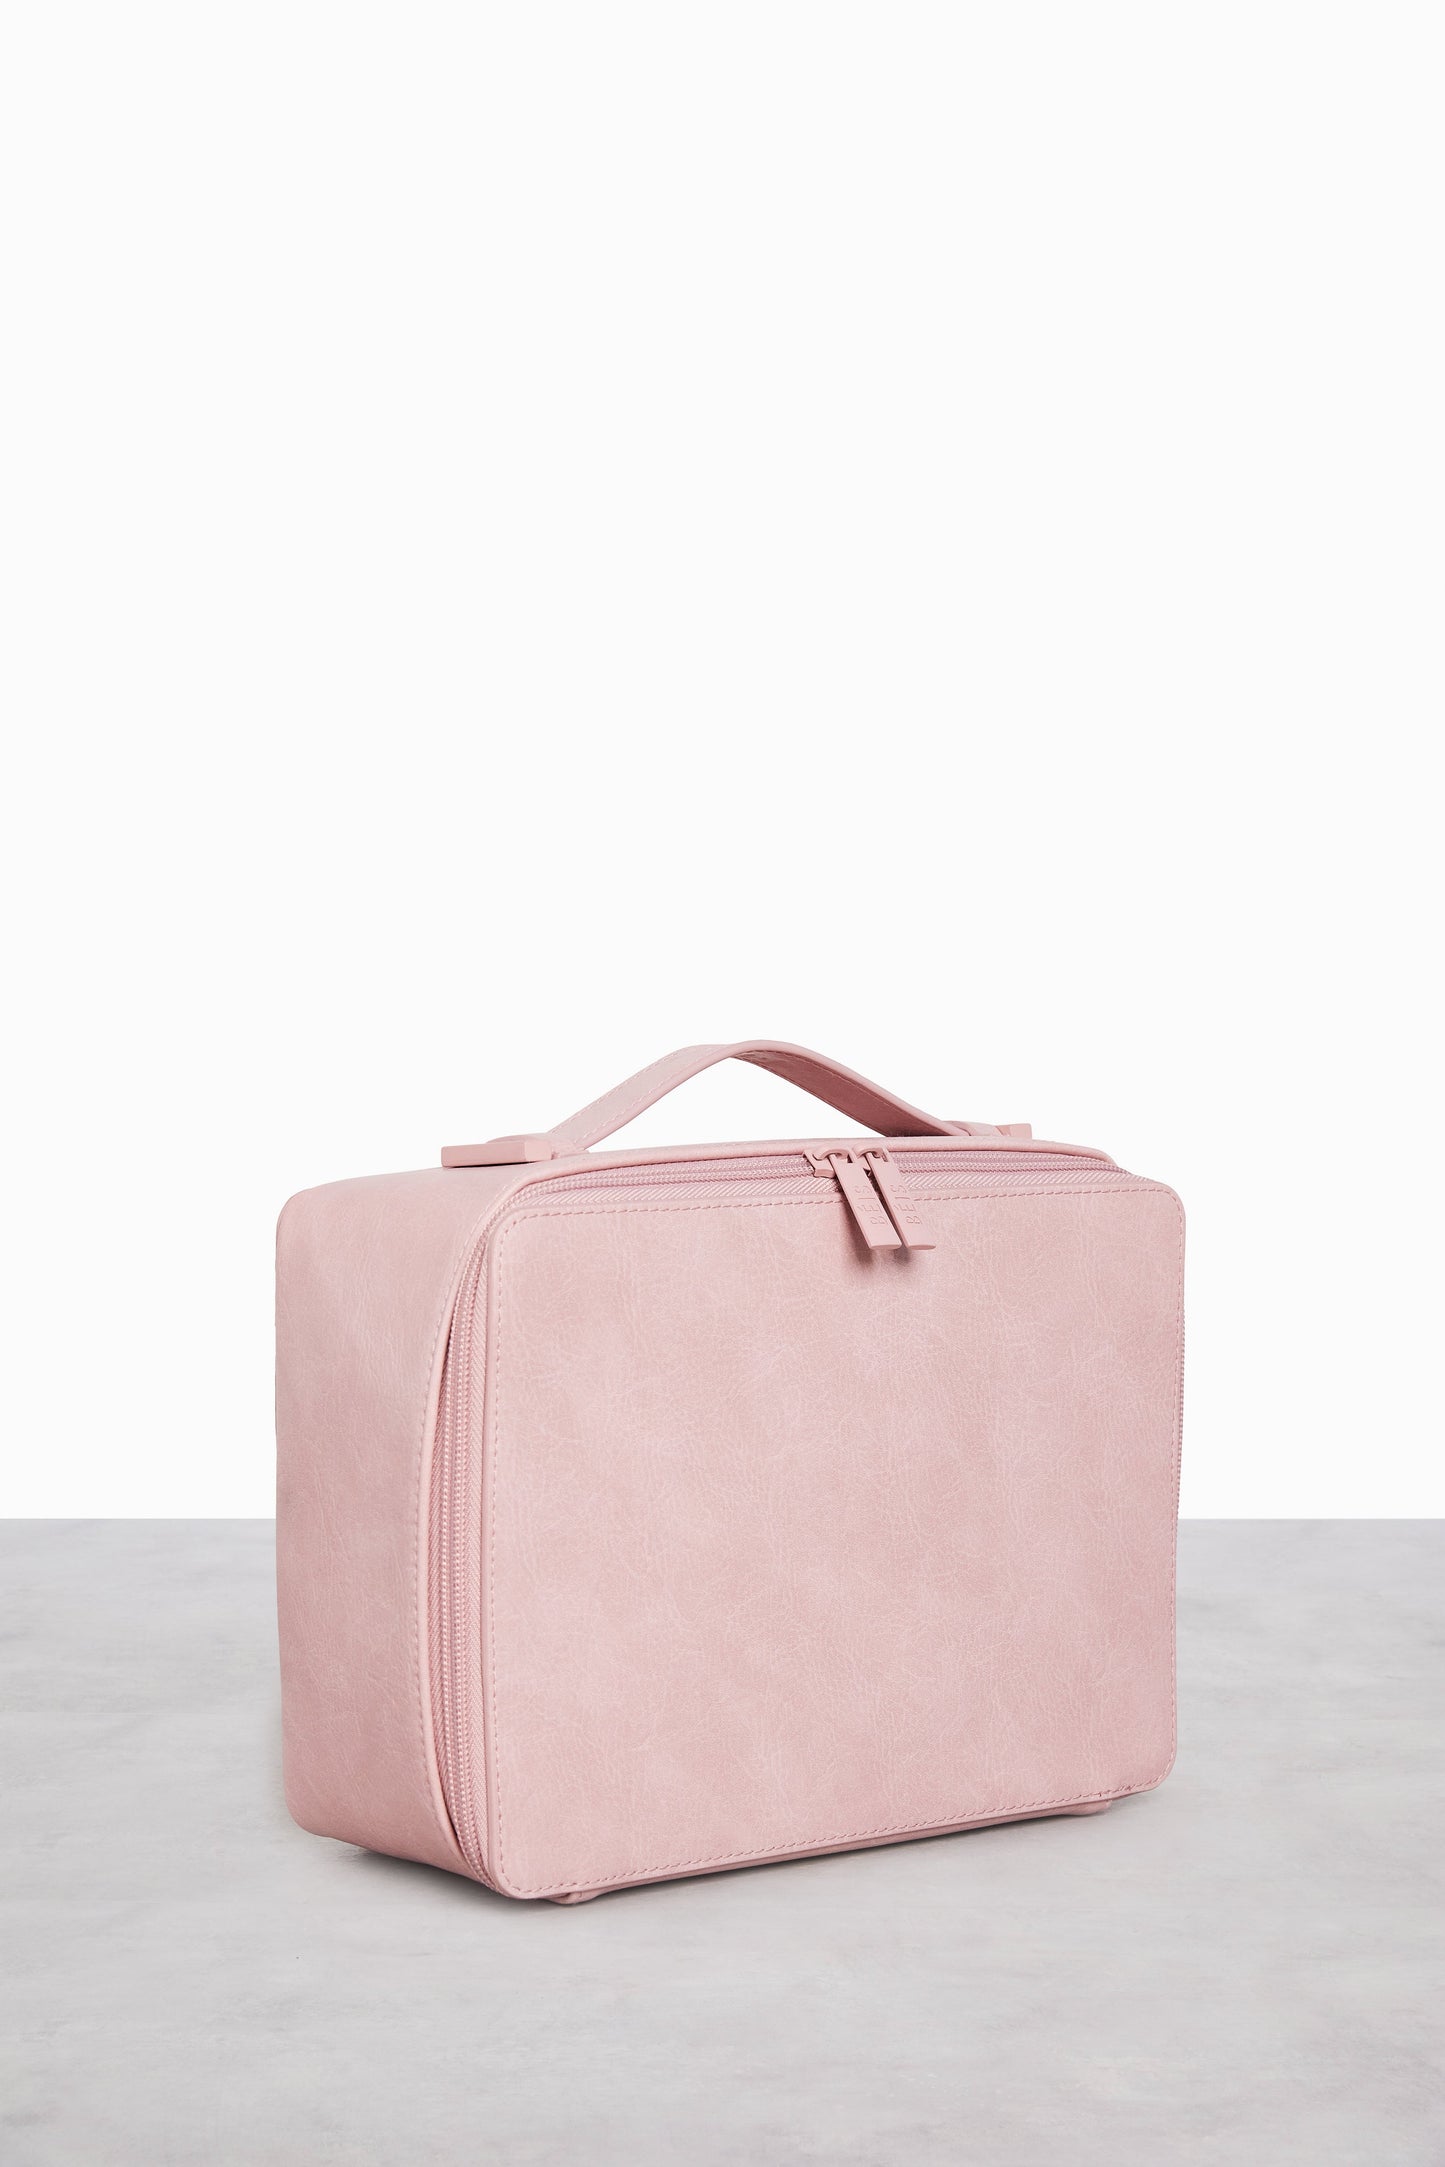 The Cosmetic Case in Atlas Pink